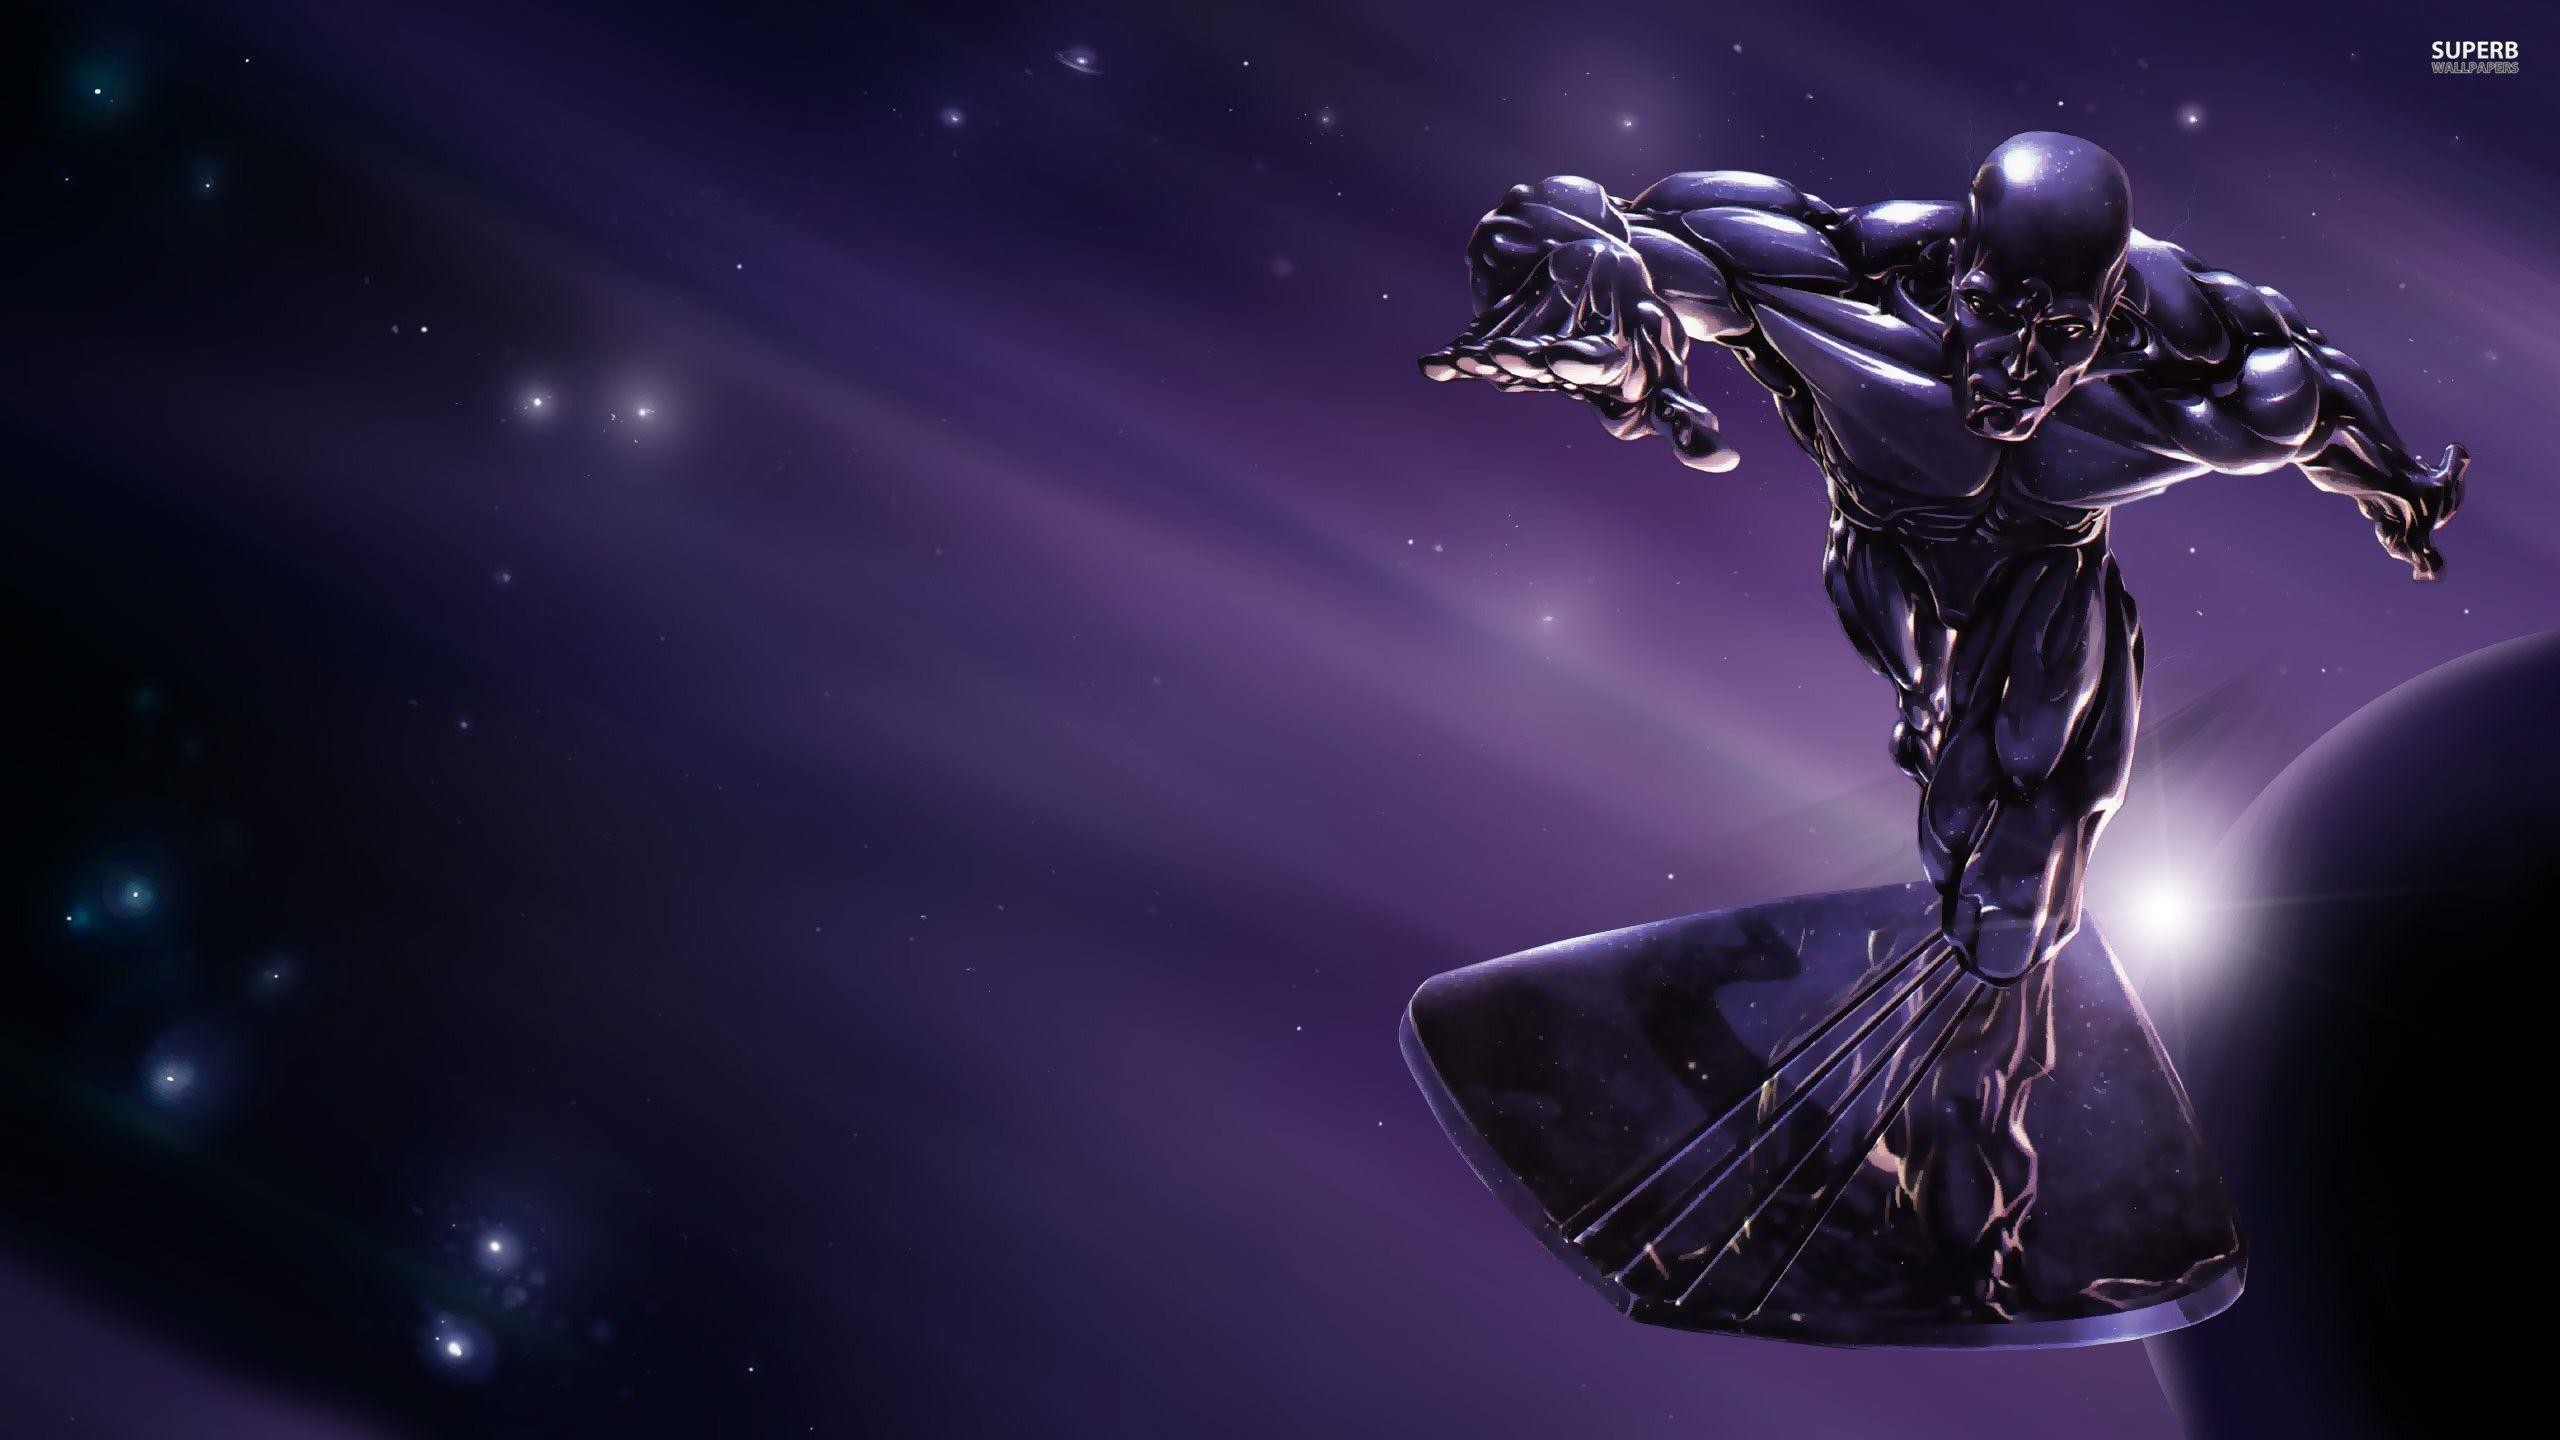 Fantastic 4 Rise of the Silver Surfer wallpaper – Movie